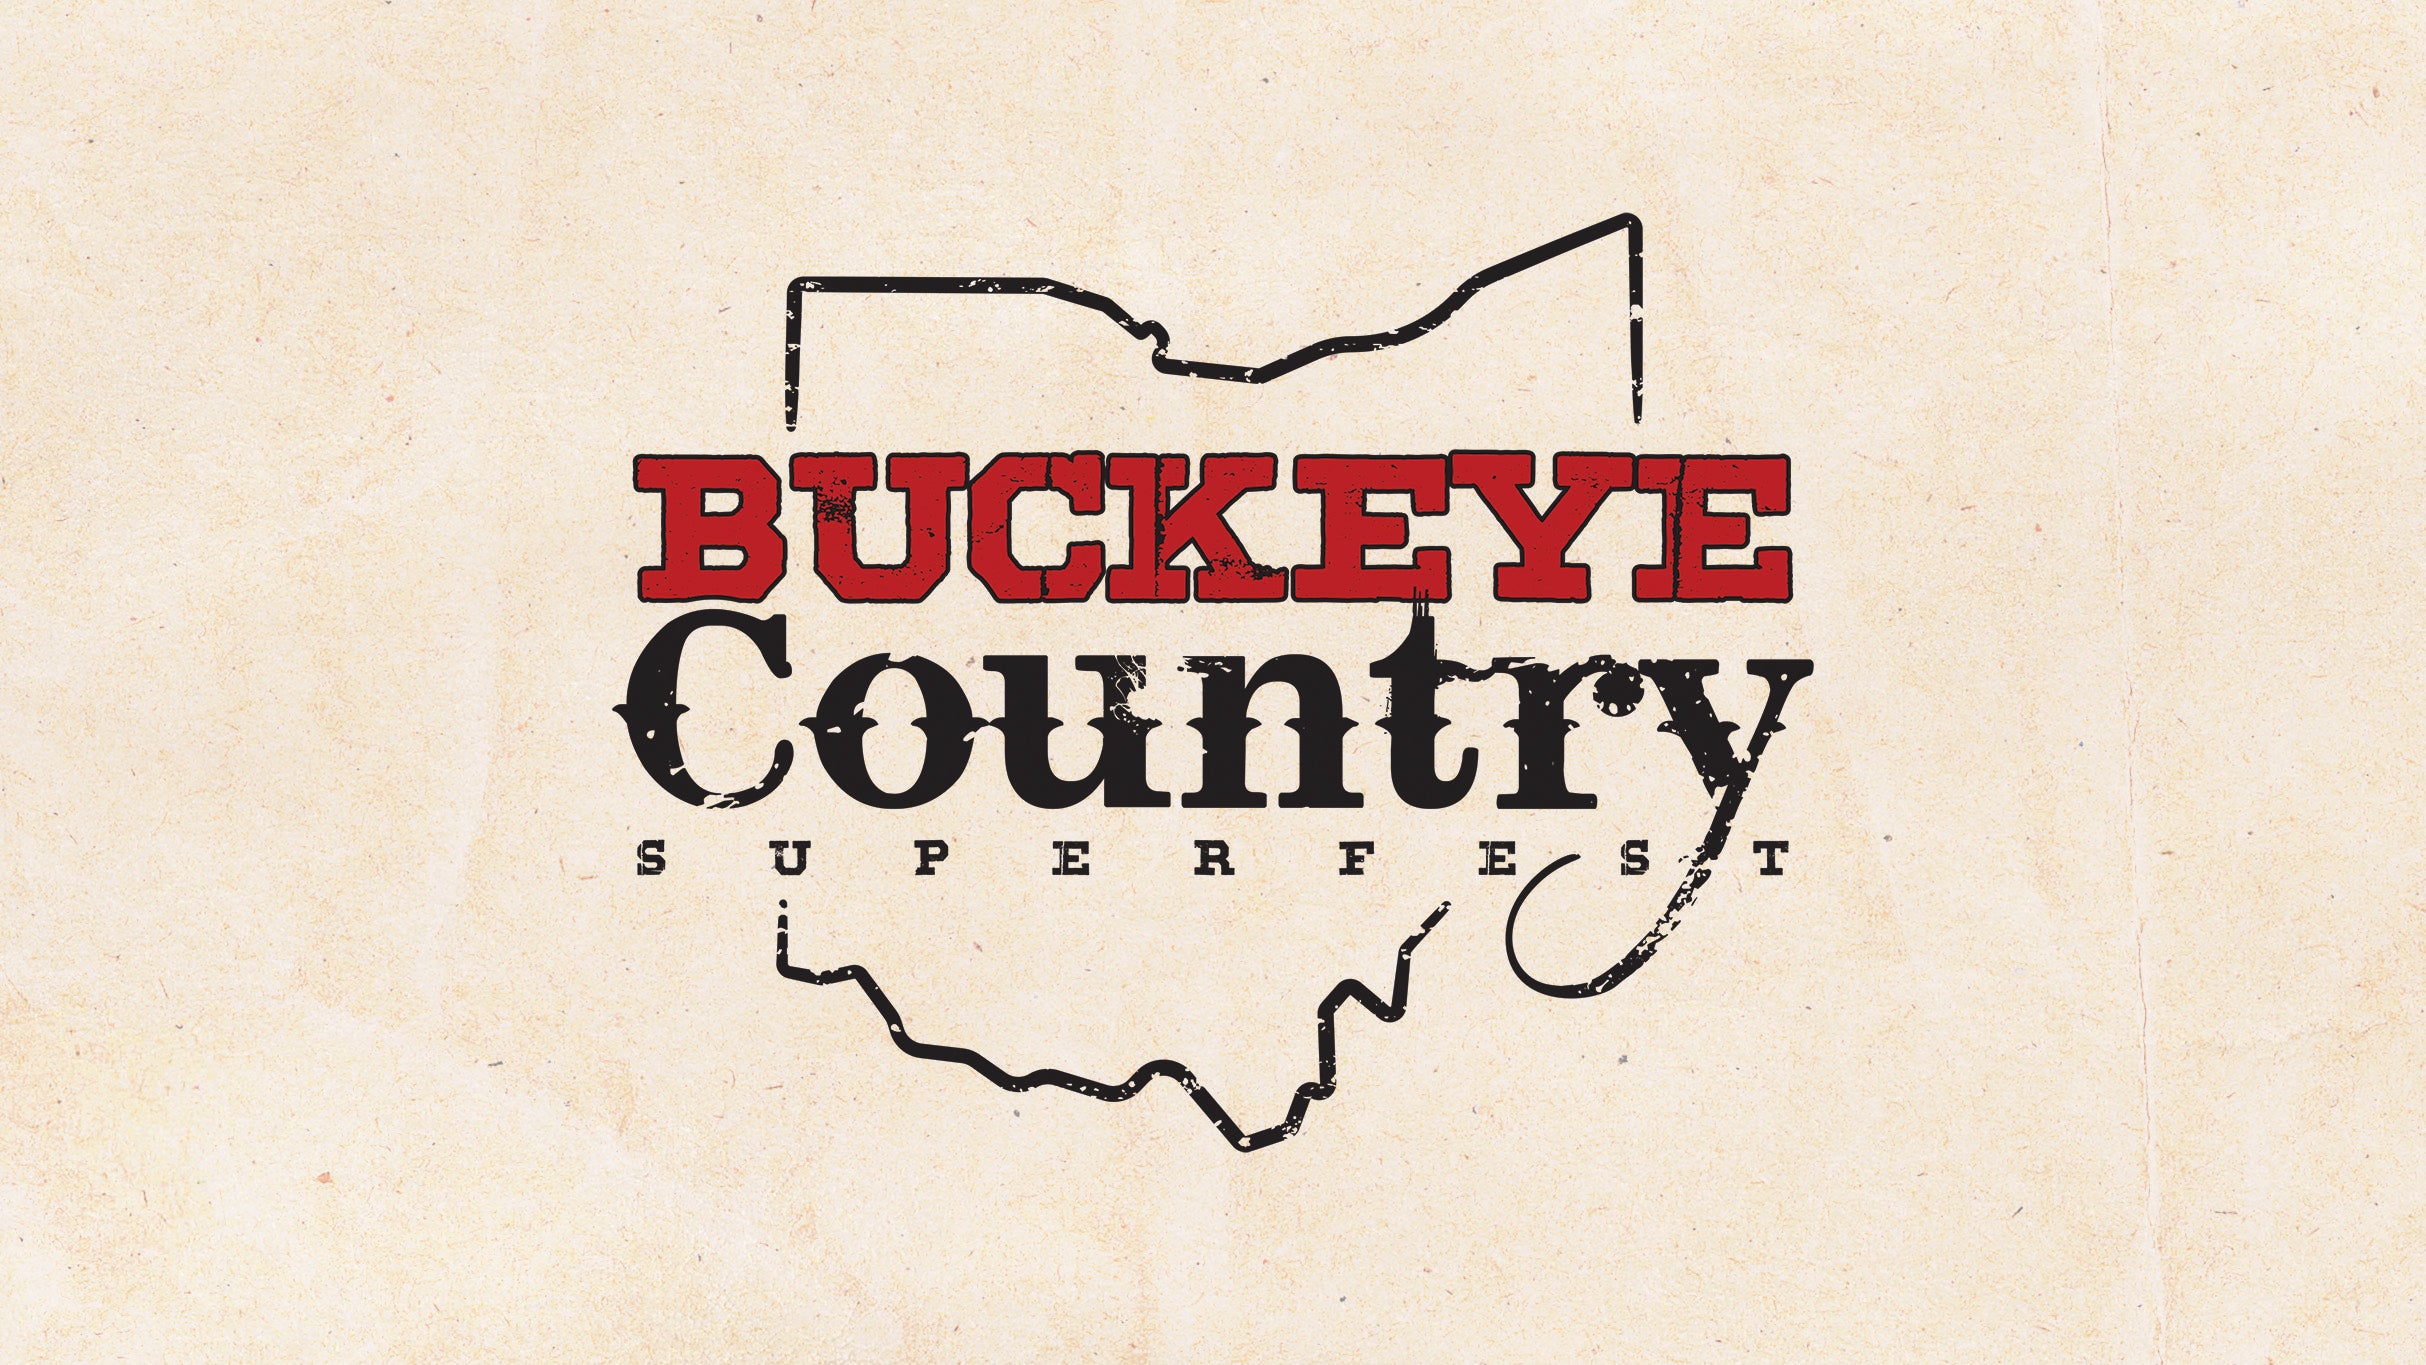 presale code for Buckeye Country Superfest starring Zach Bryan tickets in Columbus at Ohio Stadium